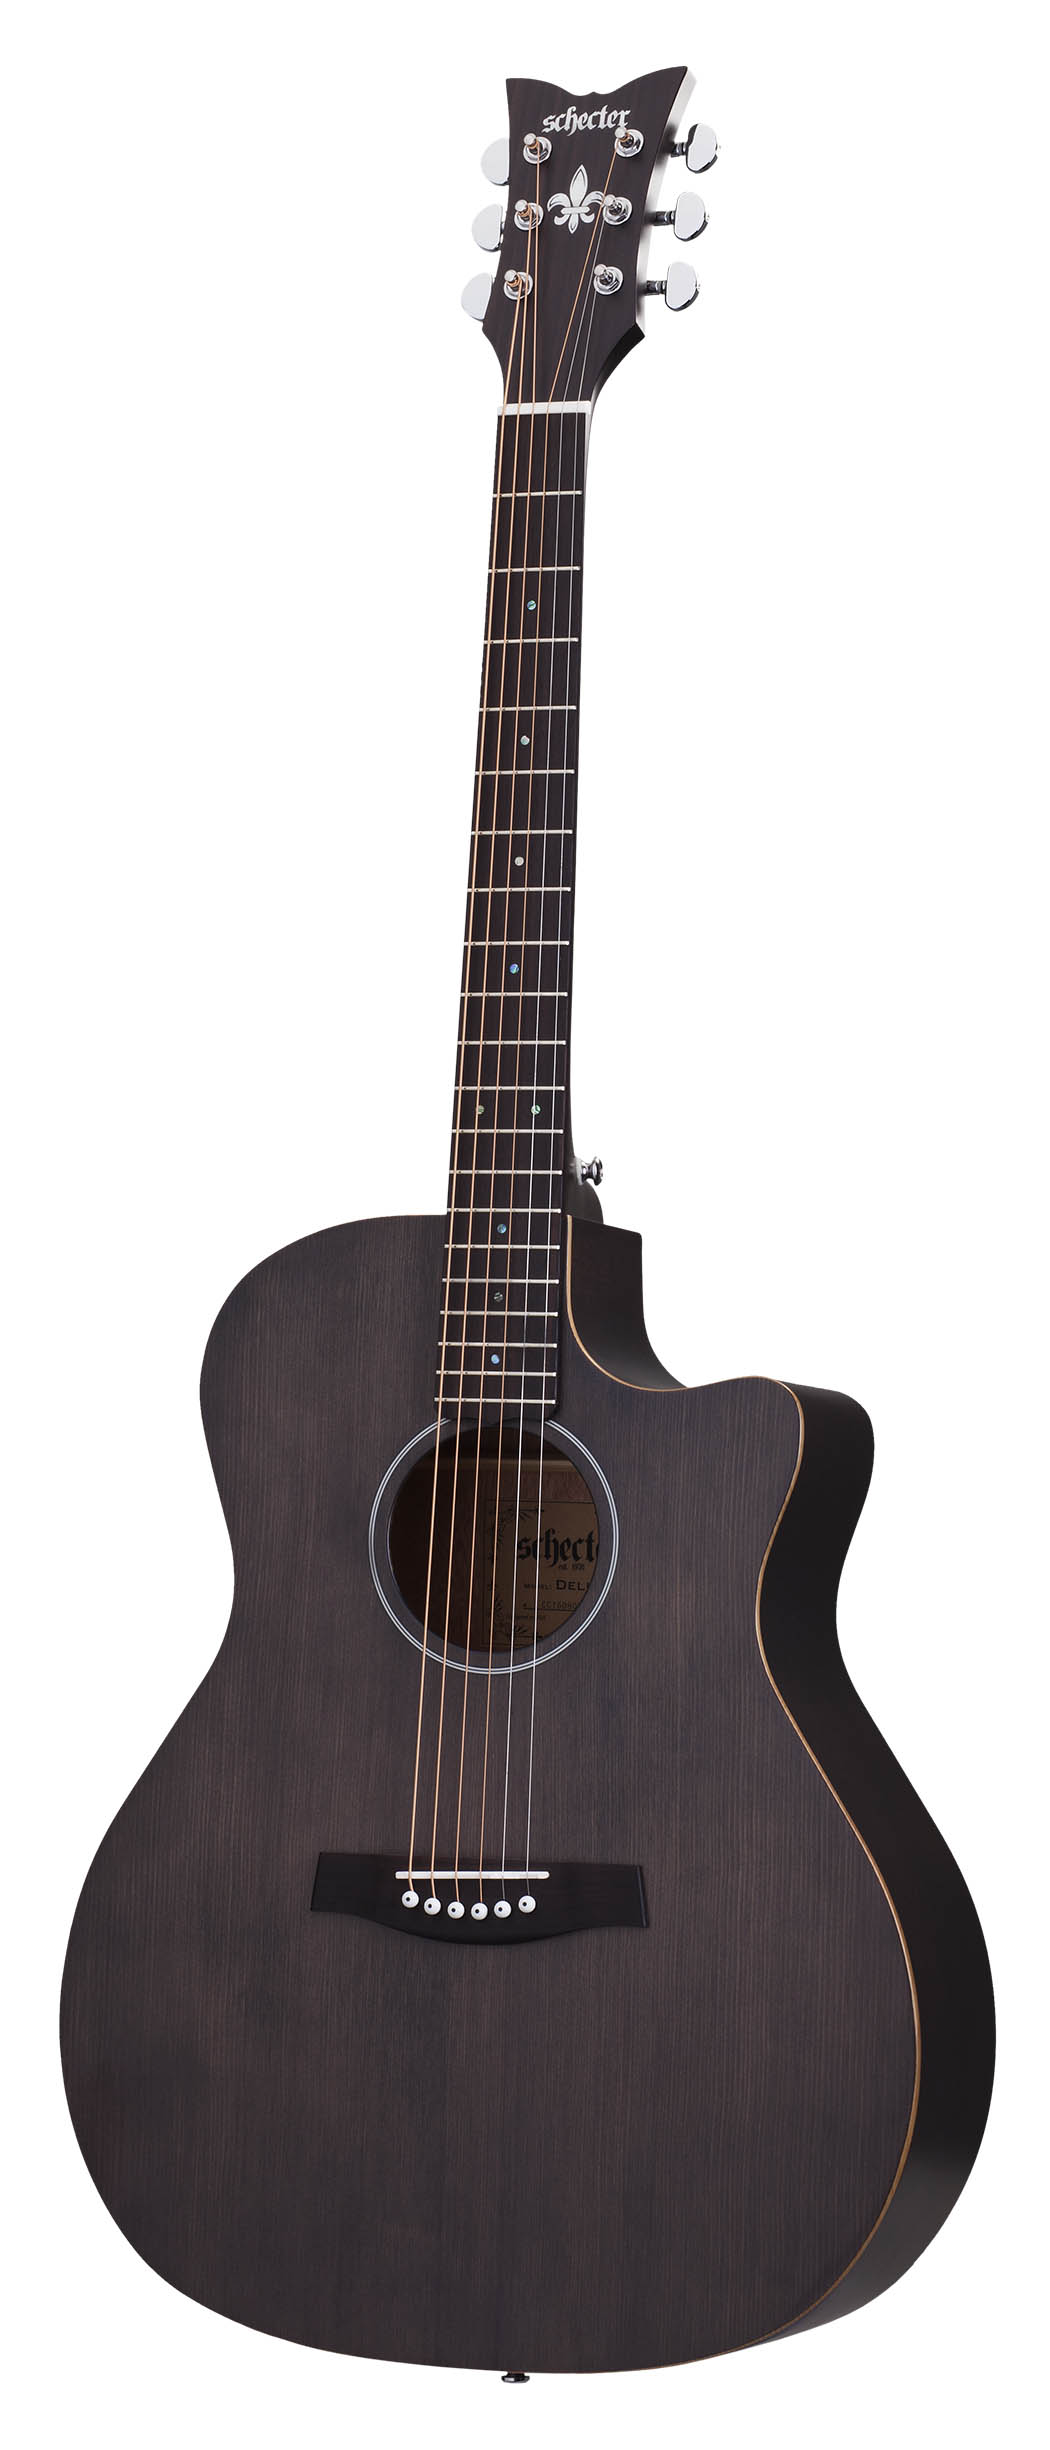 An image of Schecter Deluxe Acoustic in Satin See Thru Black